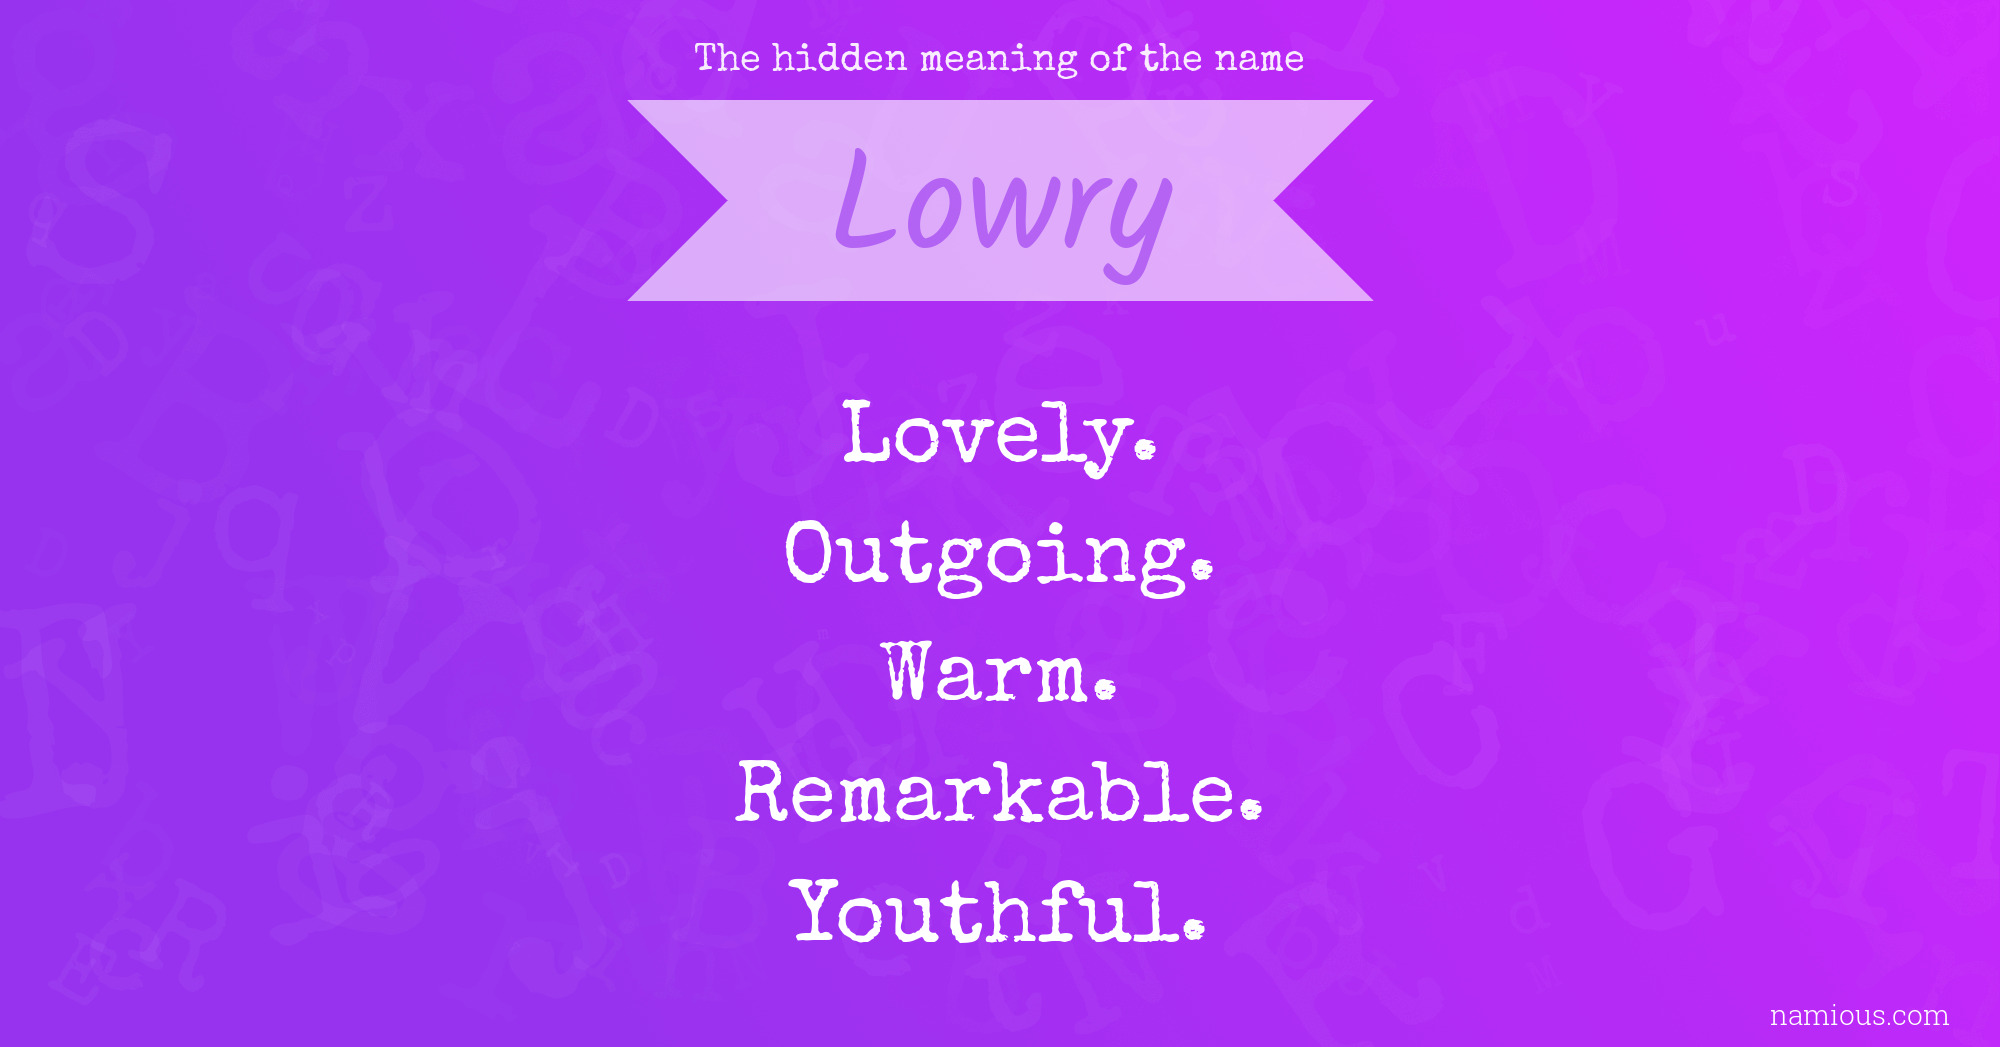 The hidden meaning of the name Lowry